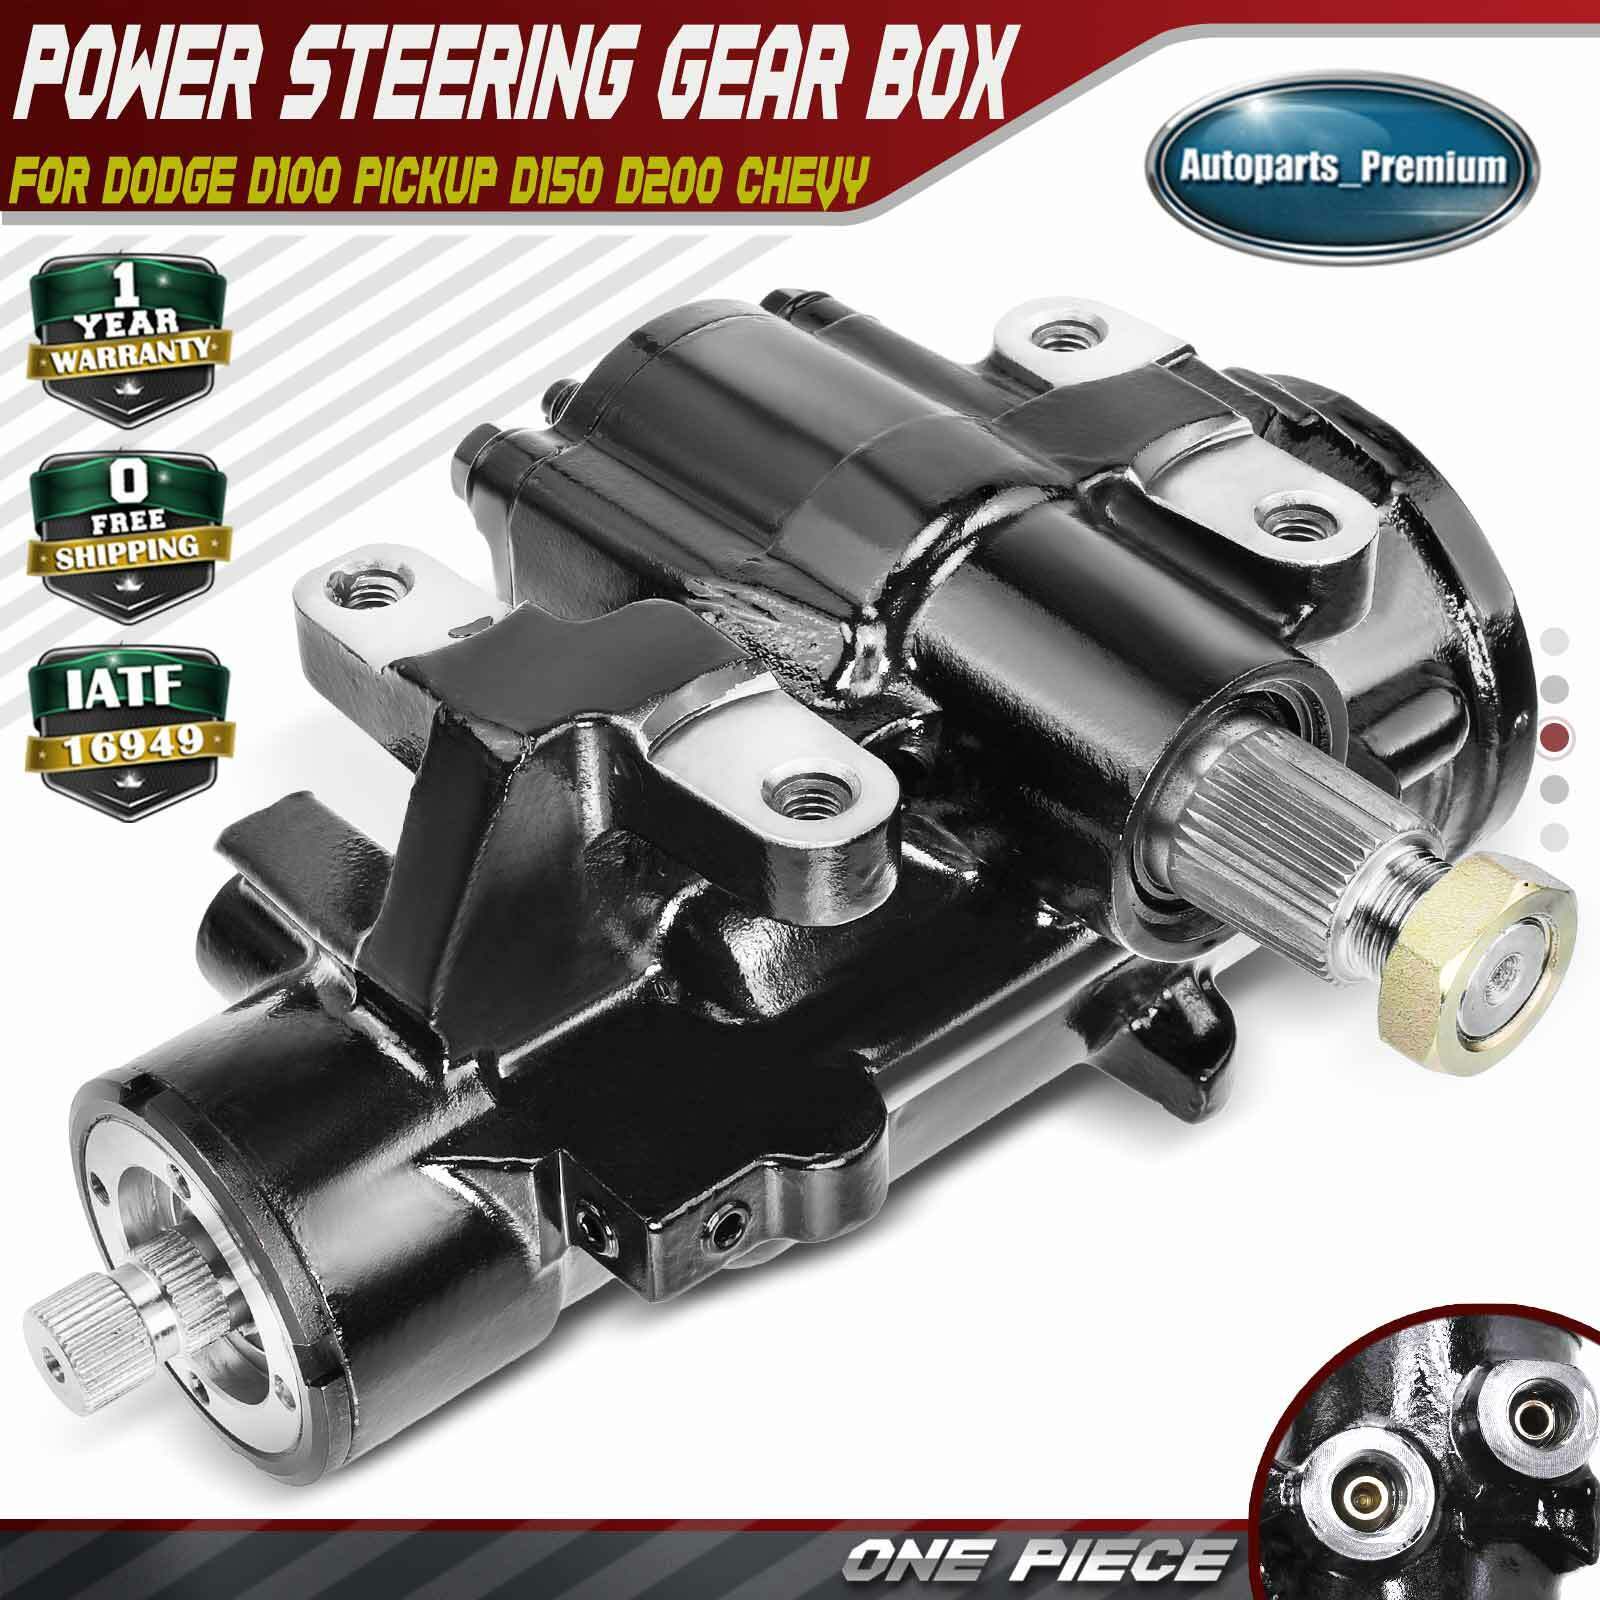 Power Steering Gear Box for Dodge D100 D200 Pickup Chevrolet GMC Jimmy Plymouth